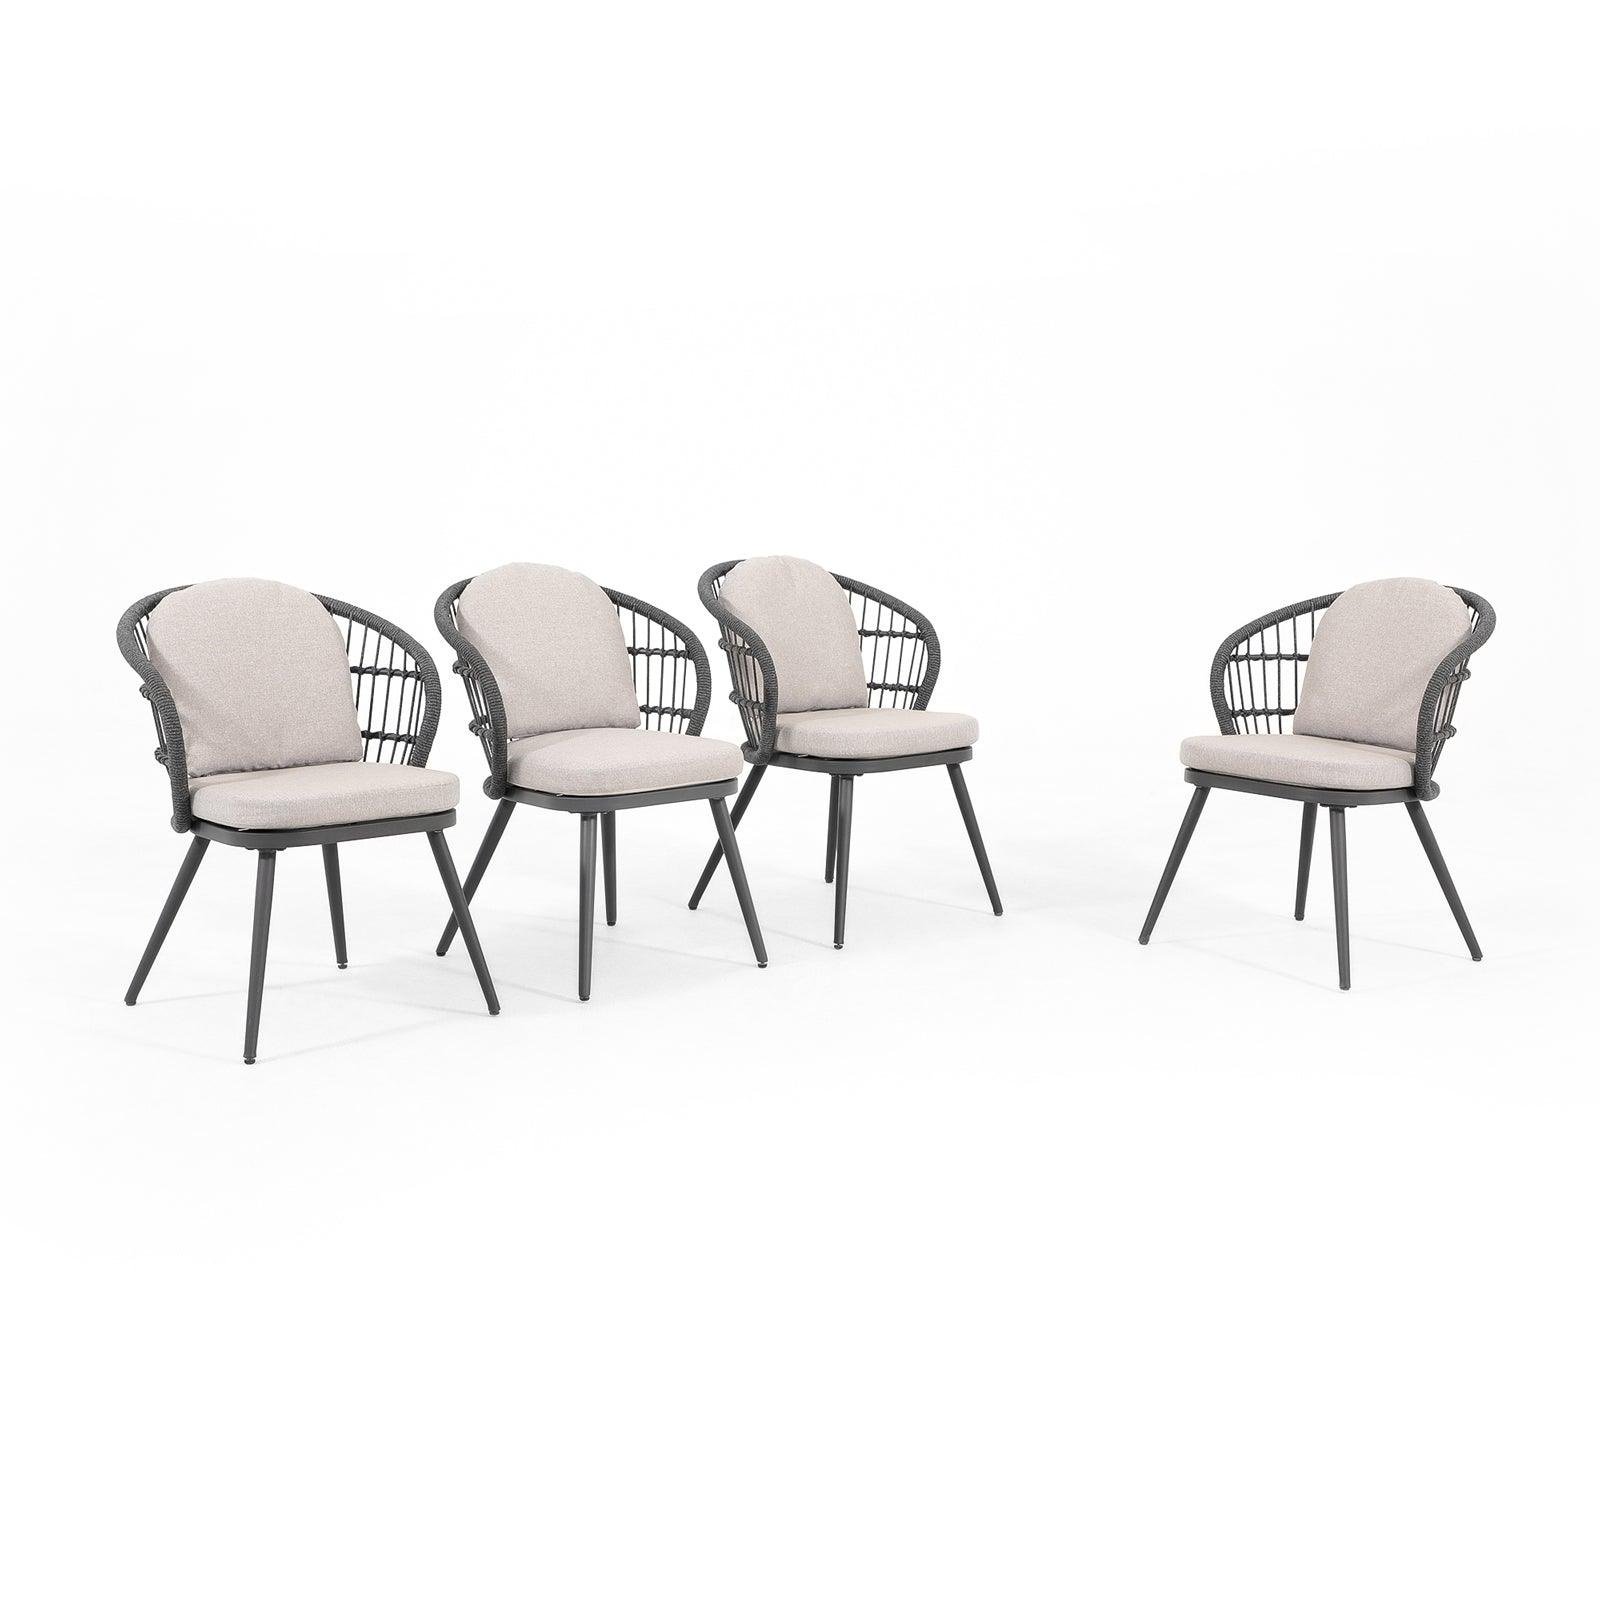 Comino 4pcs dark grey aluminum dining chairs with backrest rope design and light grey cushions, 3 for left view, 1 for right view- Jardina Furniture#Pieces_4-pc.